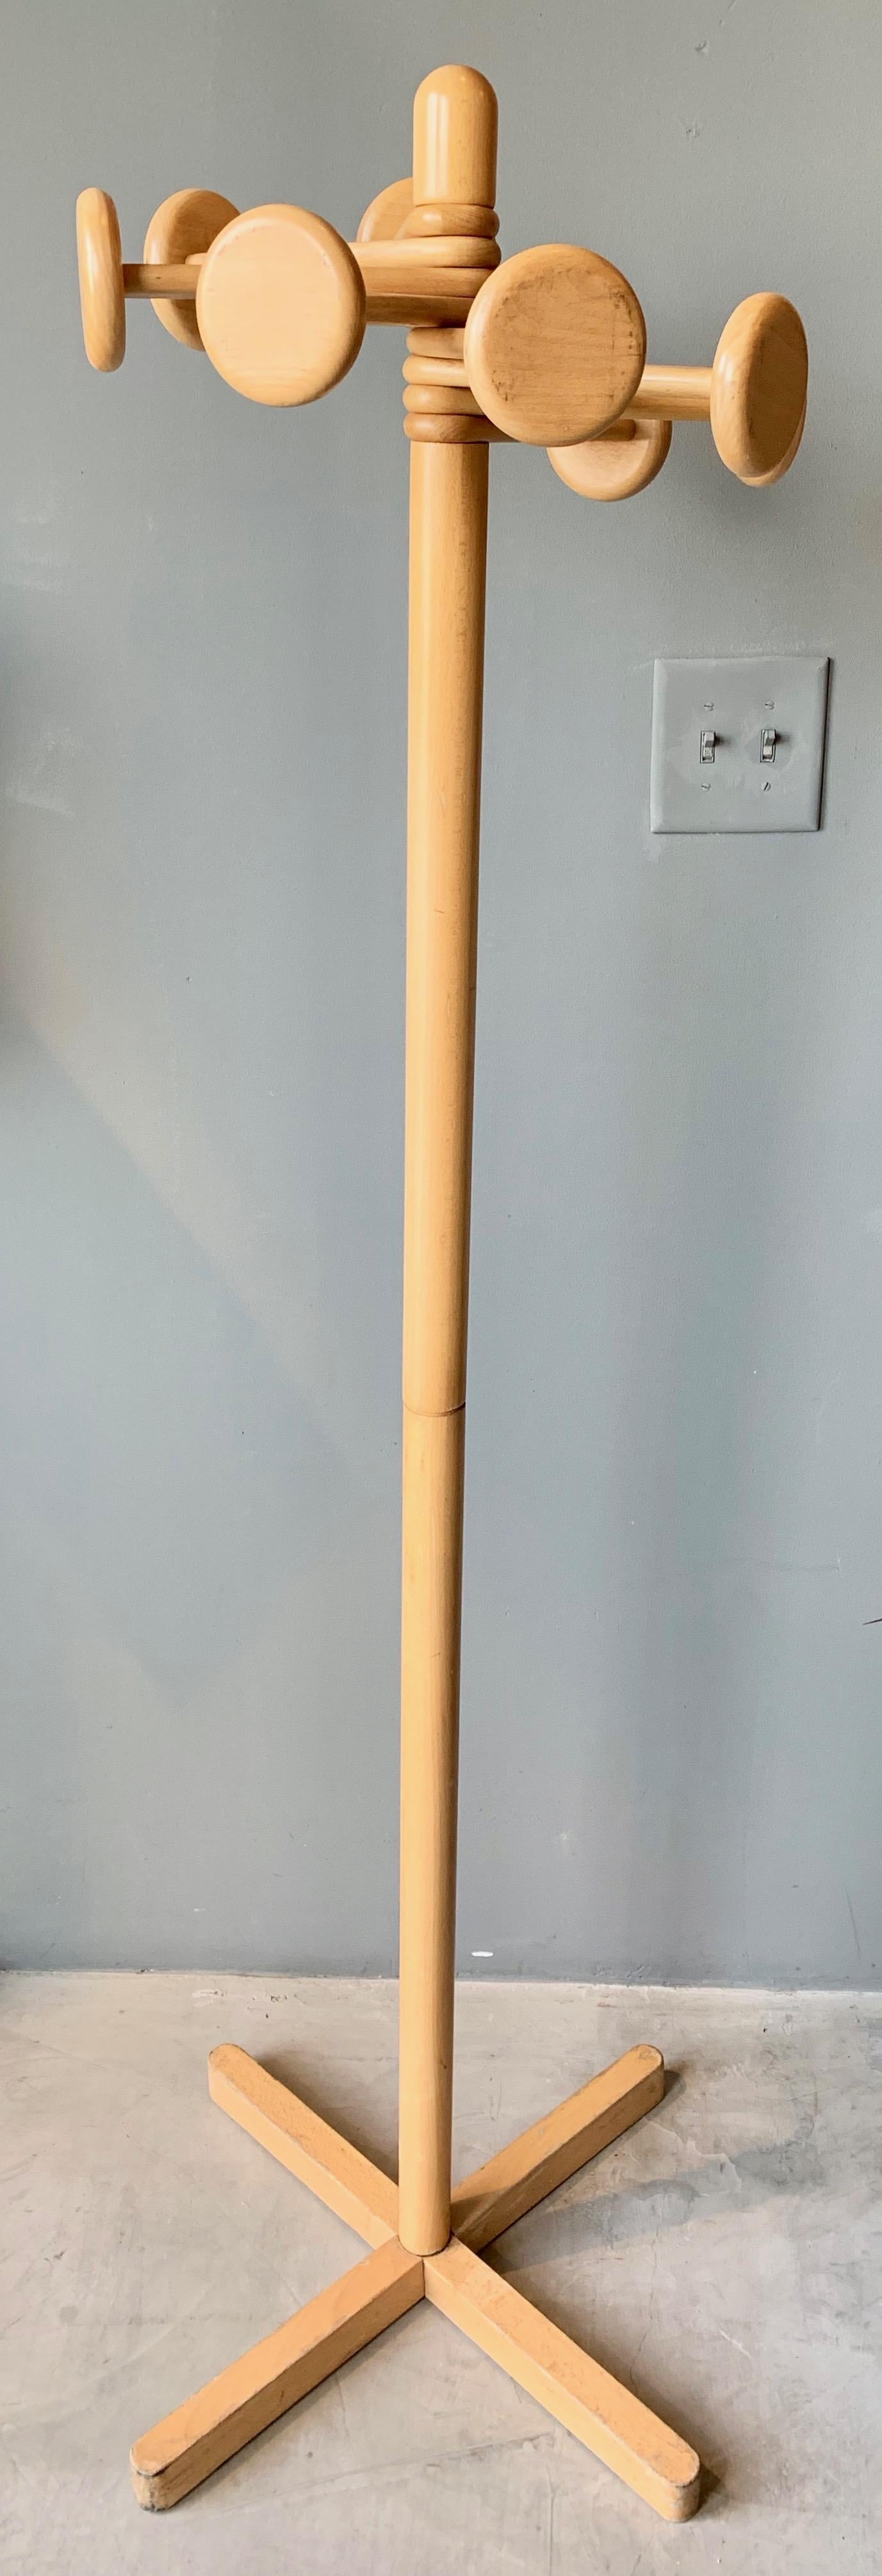 Swedish Articulated Wood Coat Rack For Sale